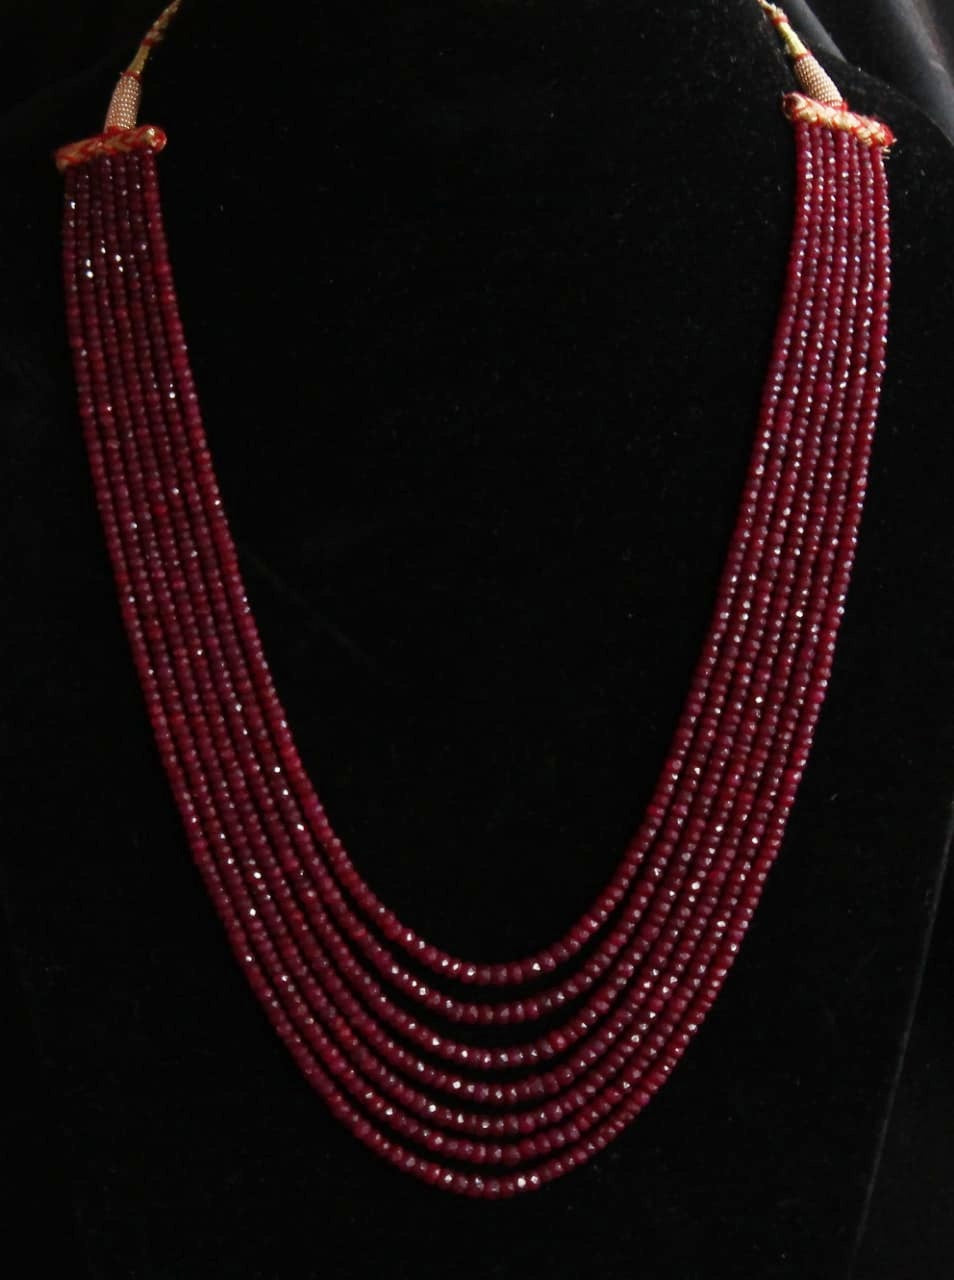 Gemzlane precious ruby 7 line necklace with traditional Indian thread - Necklace